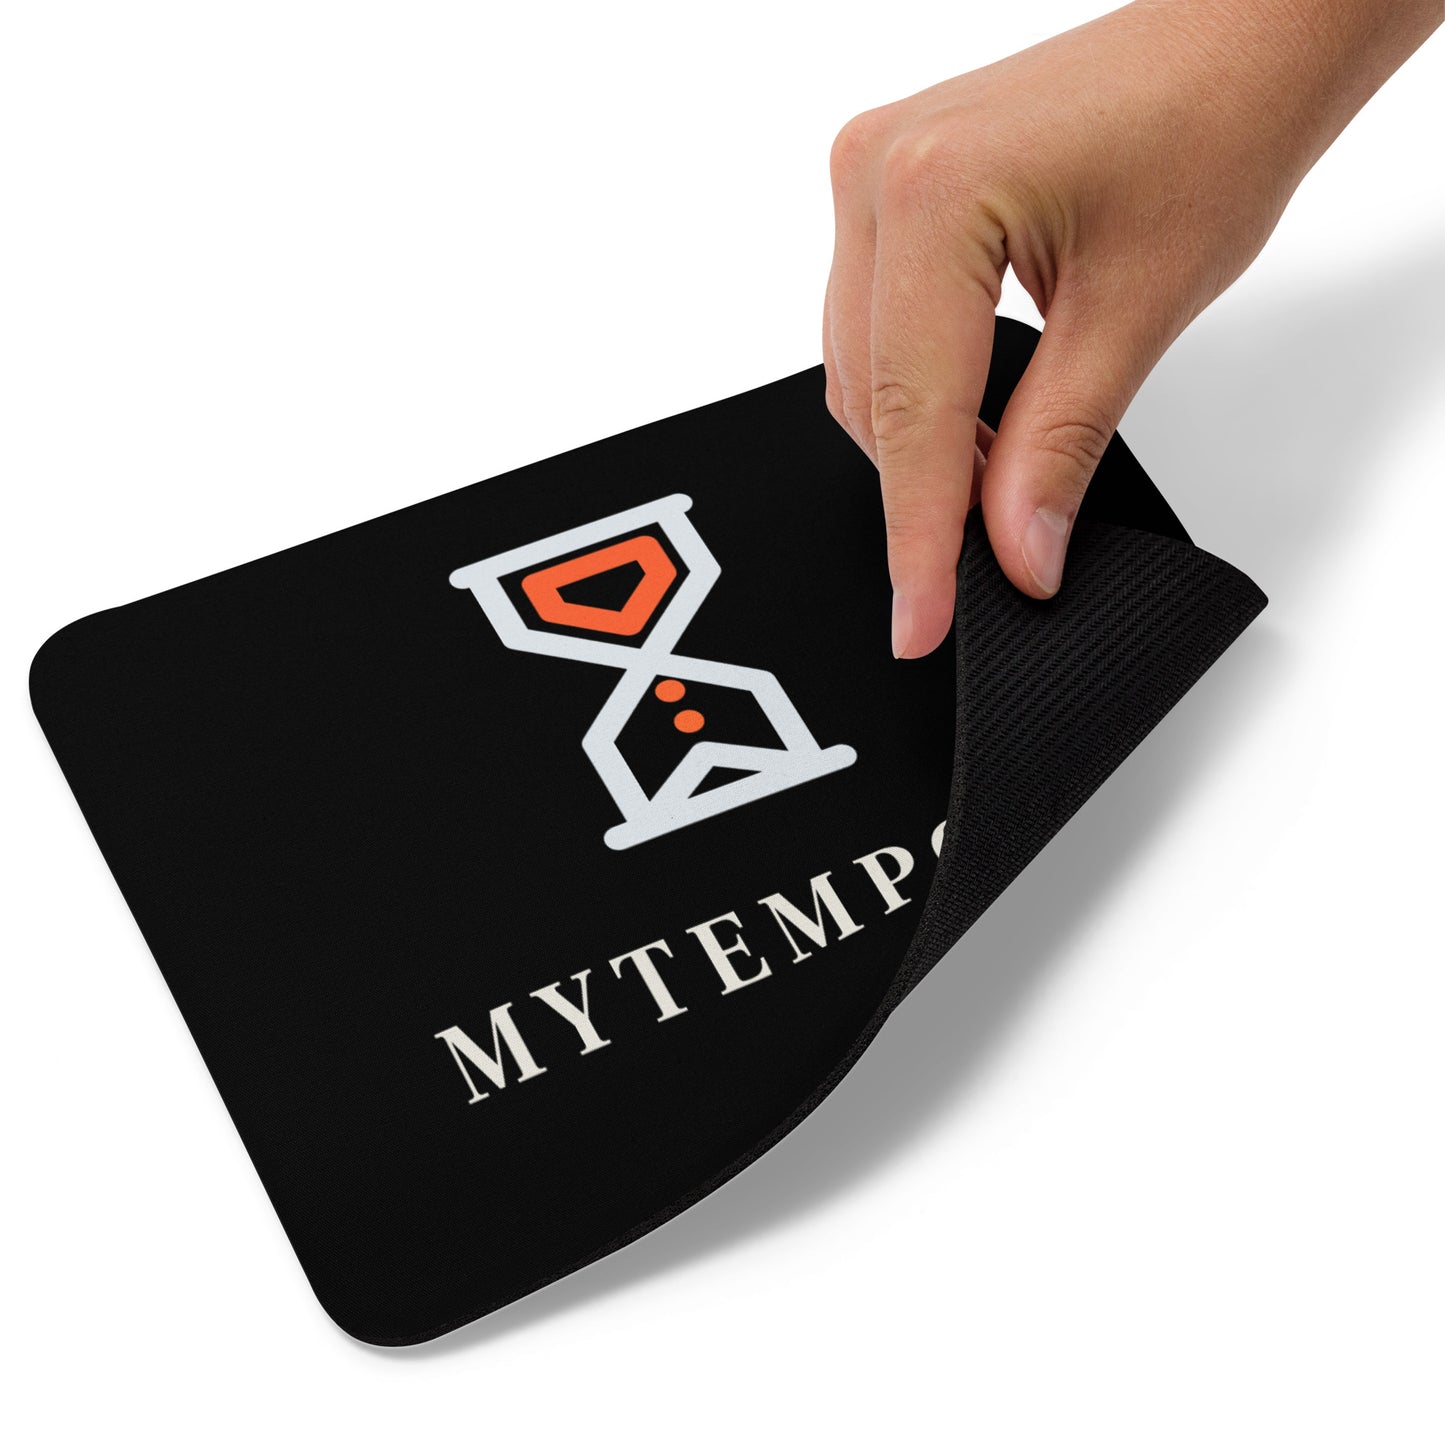 MYTEMPORE Mouse pad